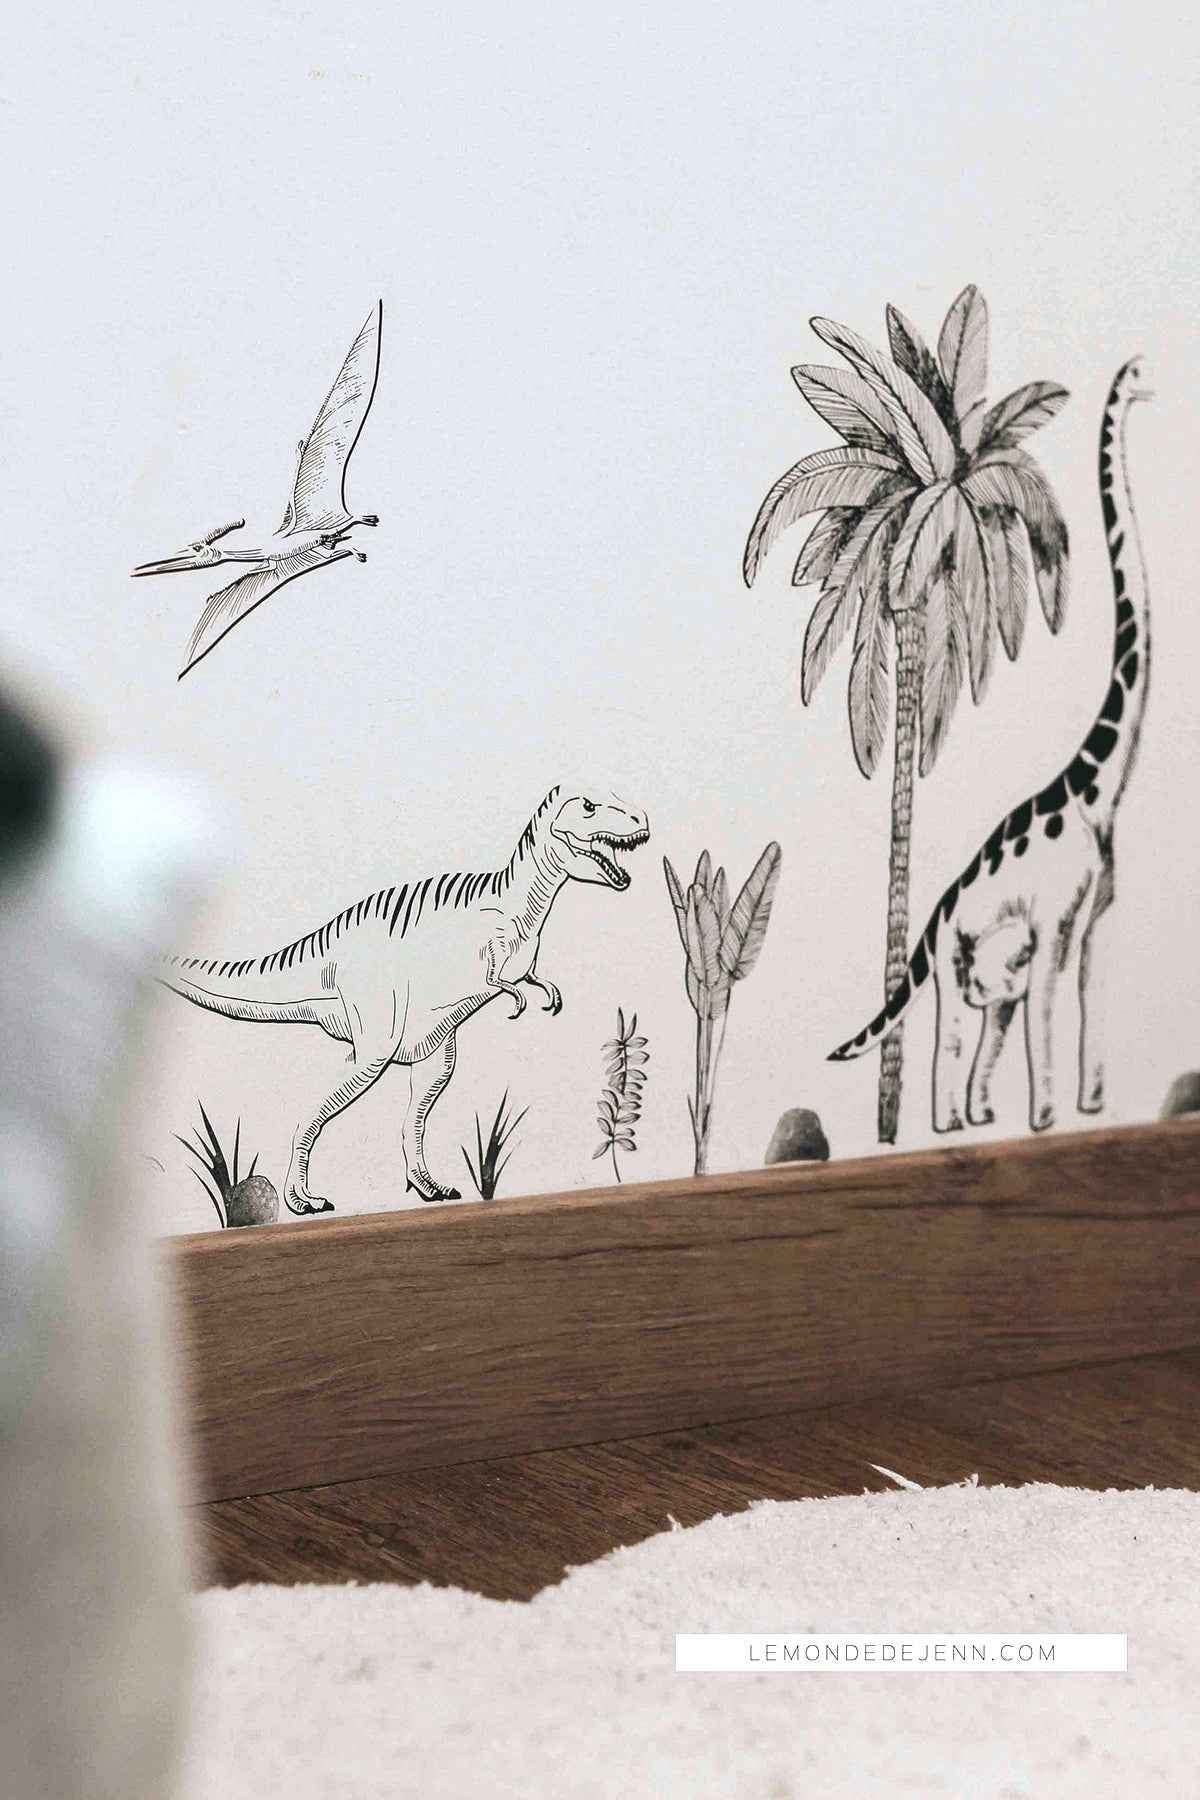 Lilipinso Wall Decals A3 - Dinosaurs & Plants Wall decal